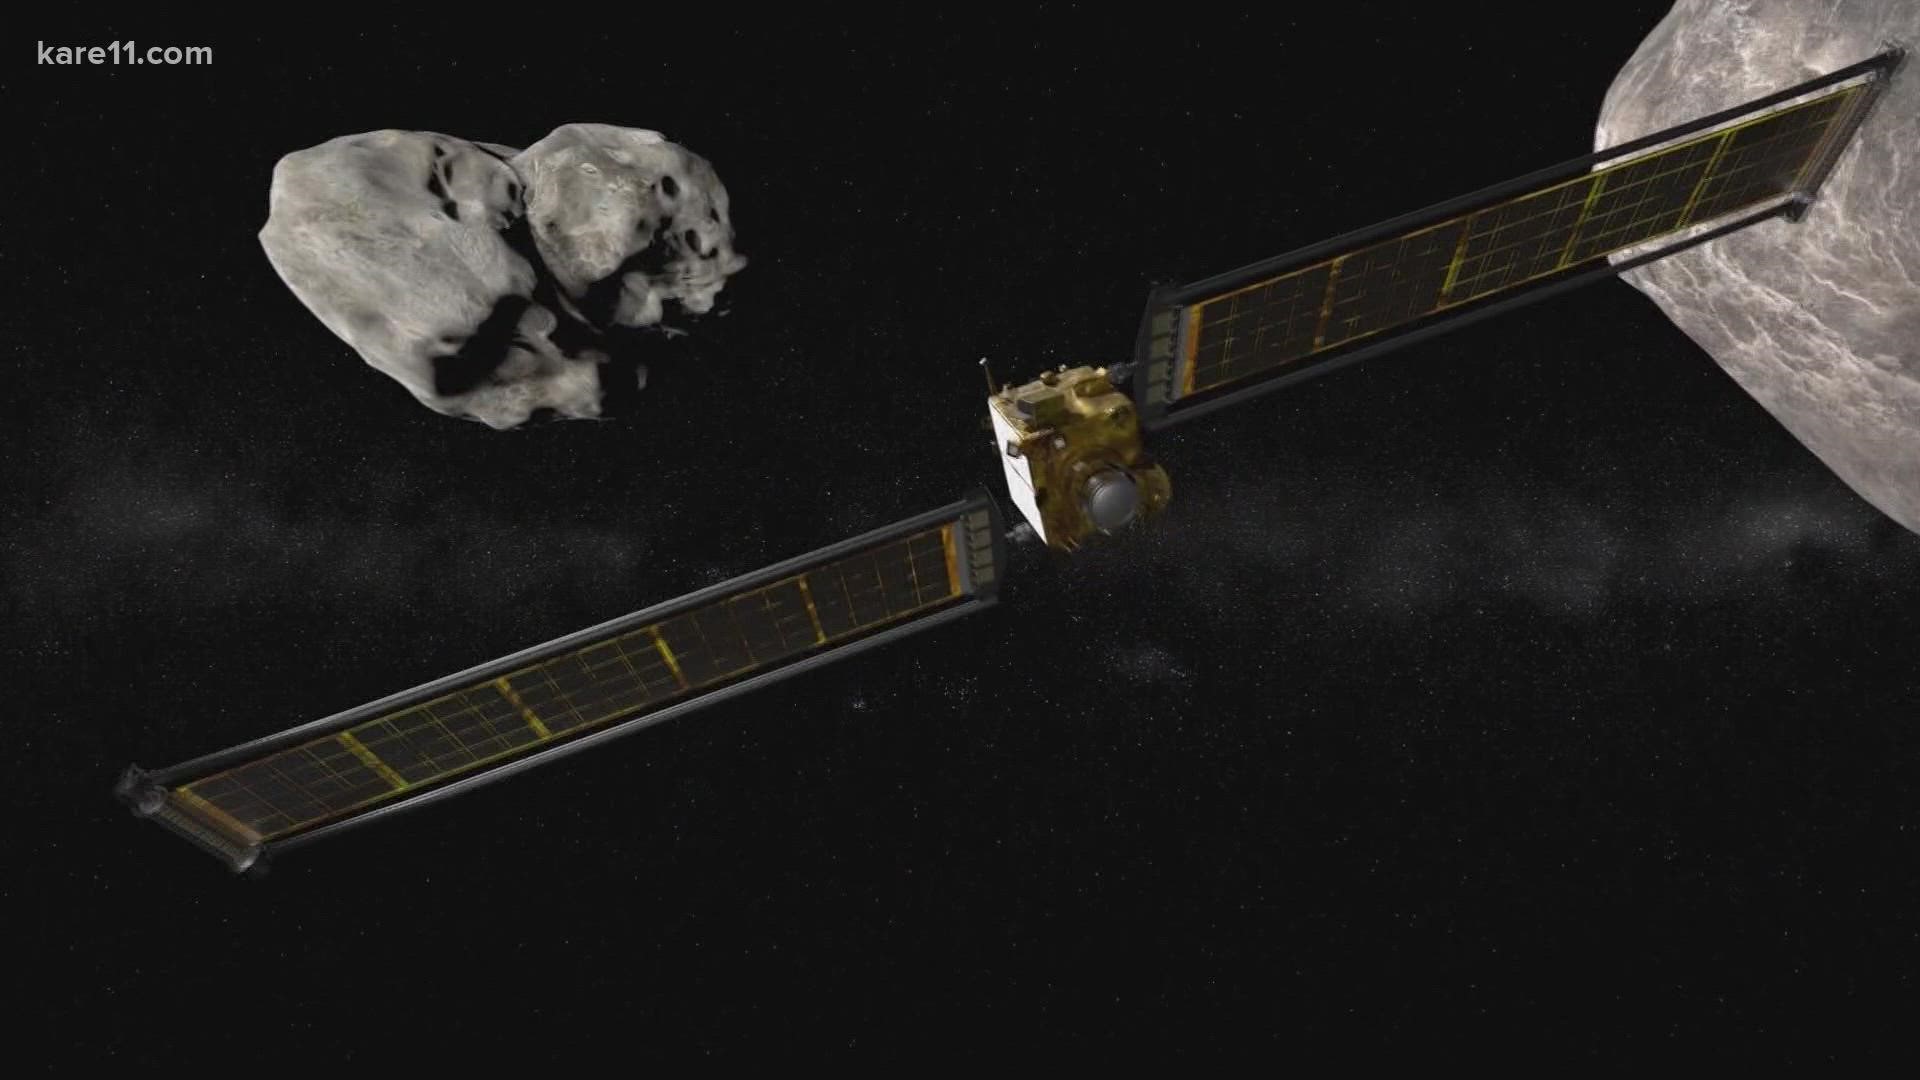 Meteorologist Ben Dery explains NASA's first-of-its-kind mission to crash a spacecraft into an asteroid in an attempt to redirect it.